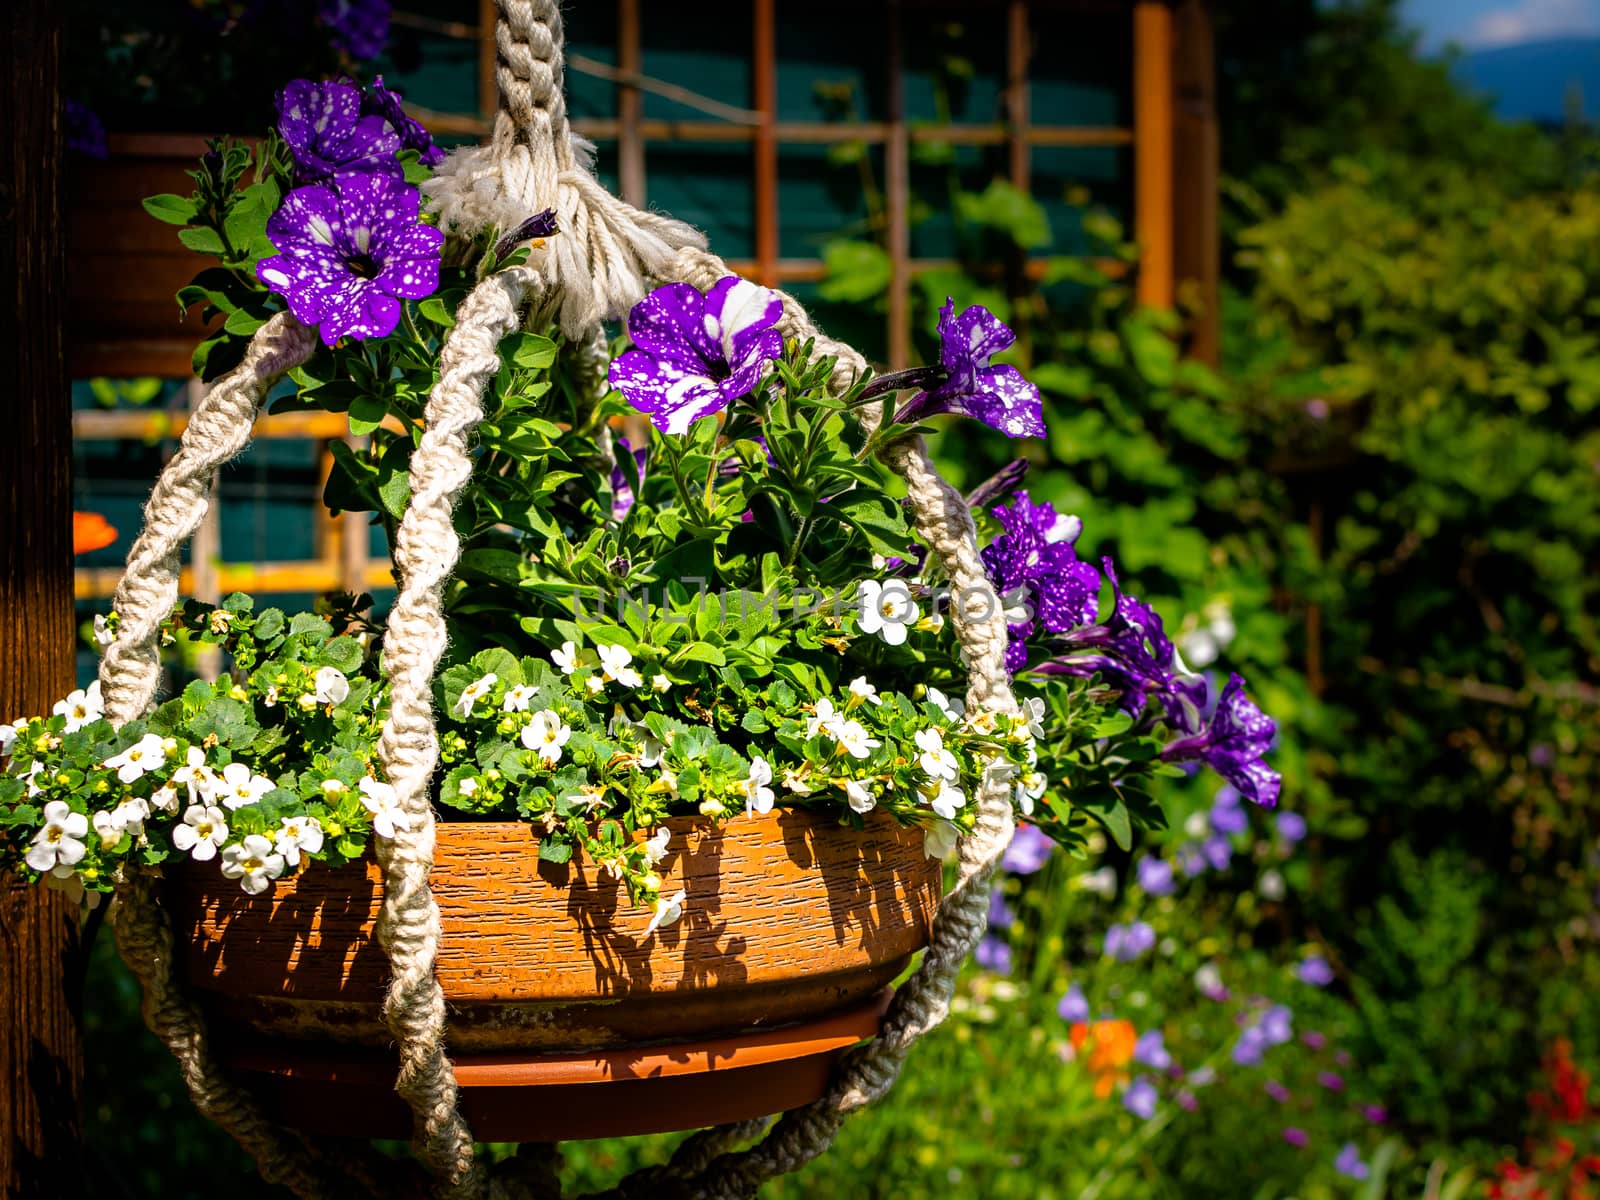 Blue petunia (Night Sky) in hanging basket in front of green plants